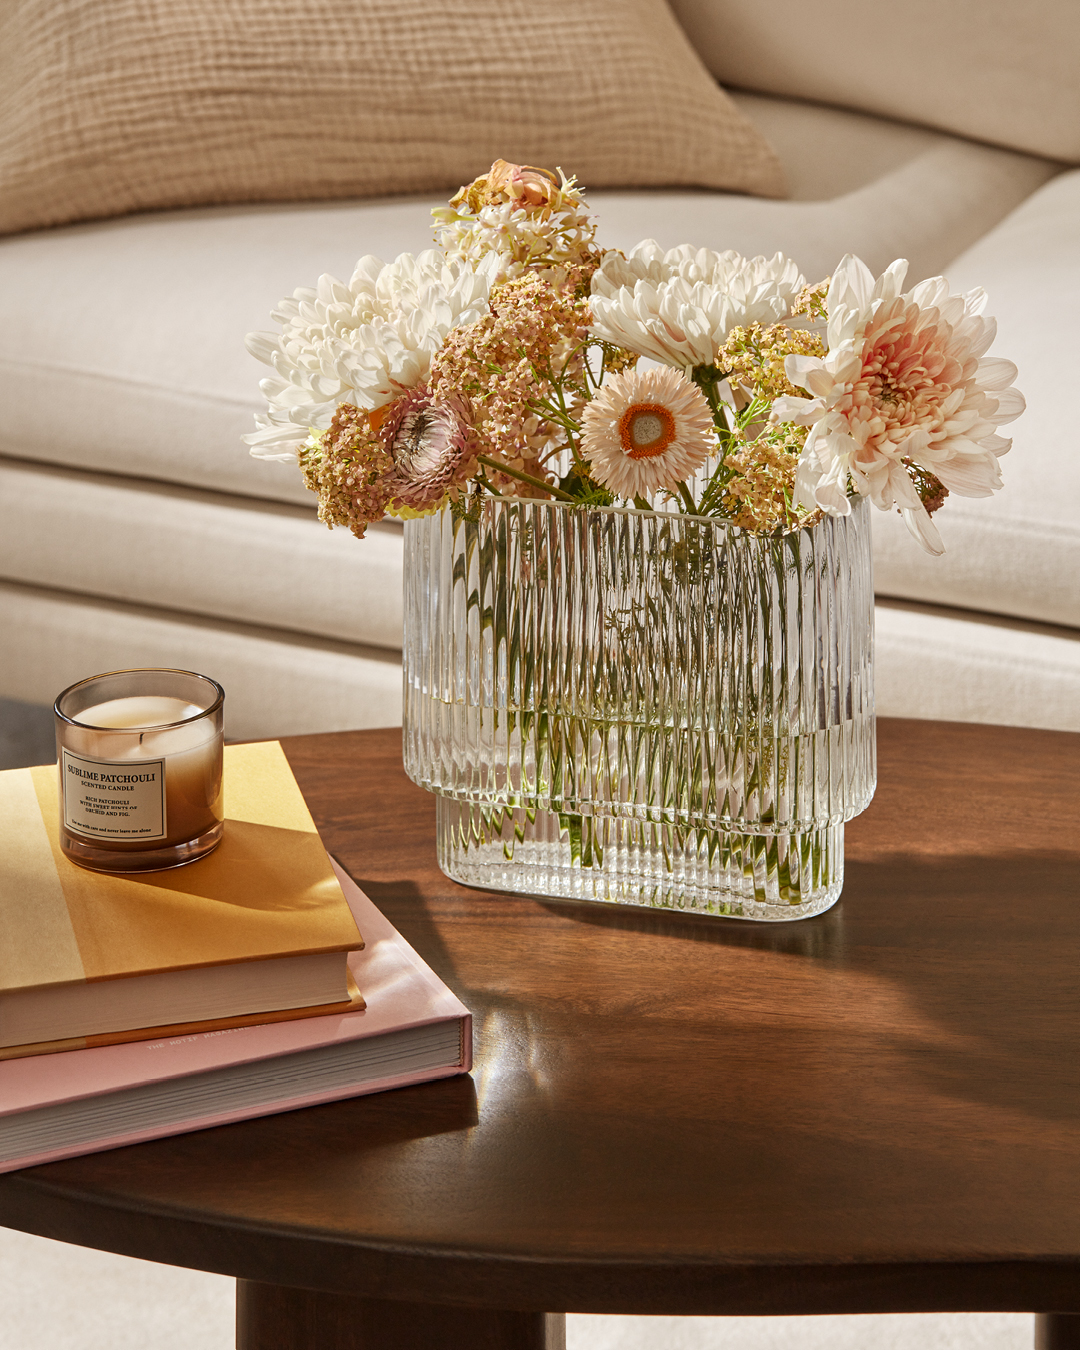 A ribbed glass vase is filled with flowers.